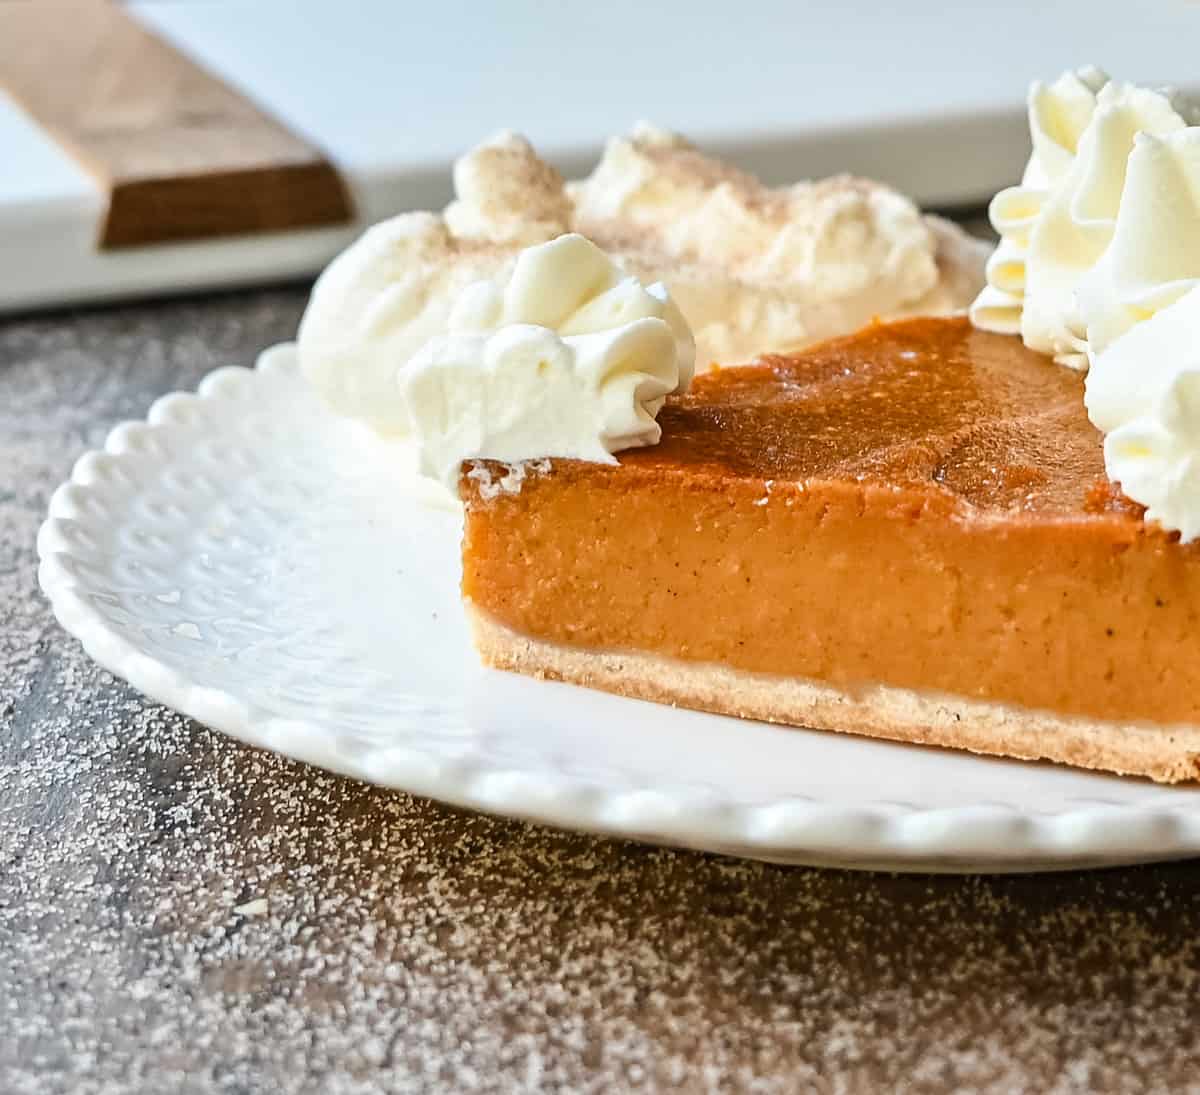 Slice of Sweet Potato Pie. This Southern Sweet Potato Pie has the creamiest, spiced brown sugar sweet potato filling in a buttery crust and topped with fresh whipped cream. This is the perfect Fall and Thanksgiving dessert.